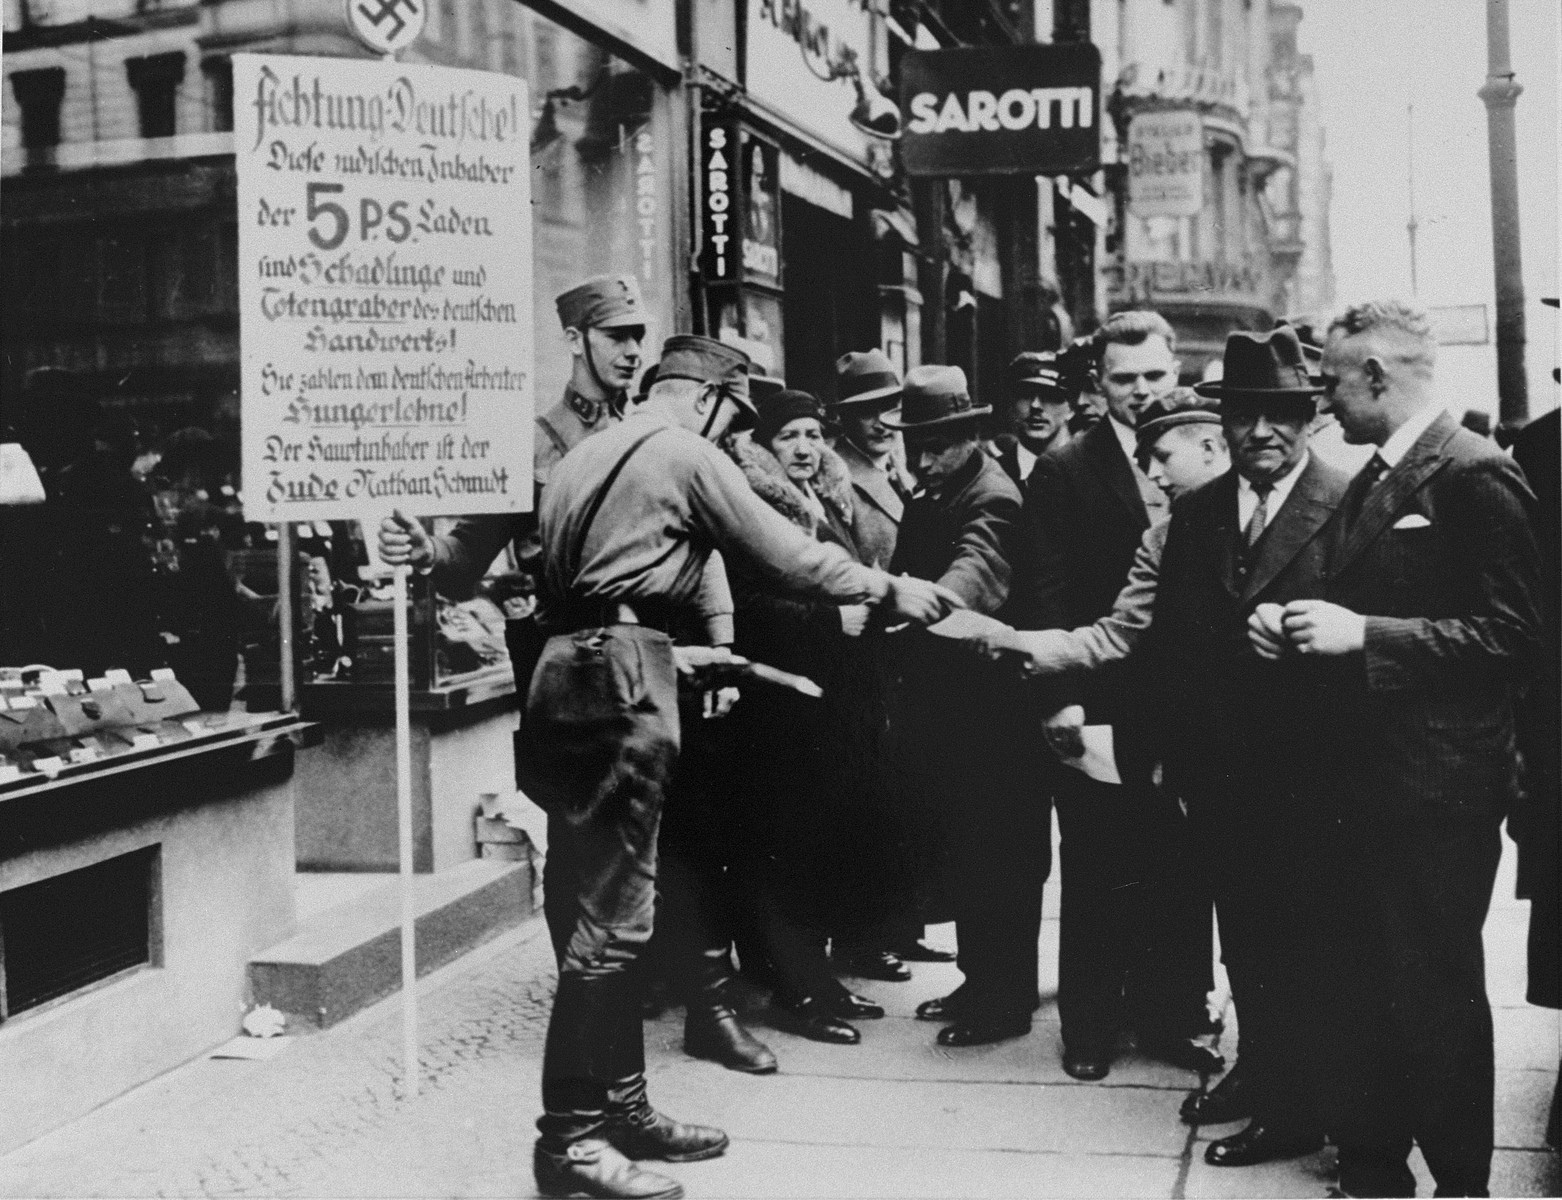 SA pickets distribute boycott pamphlets to German pedestrians.  The sign held by one of them reads: "Attention Germans. These Jewish owners of [five and dime] stores are the parasites and gravediggers of German craftsmen.  They pay starvation wages to German workers.  The chief owner is the Jew, Nathan Schmidt."